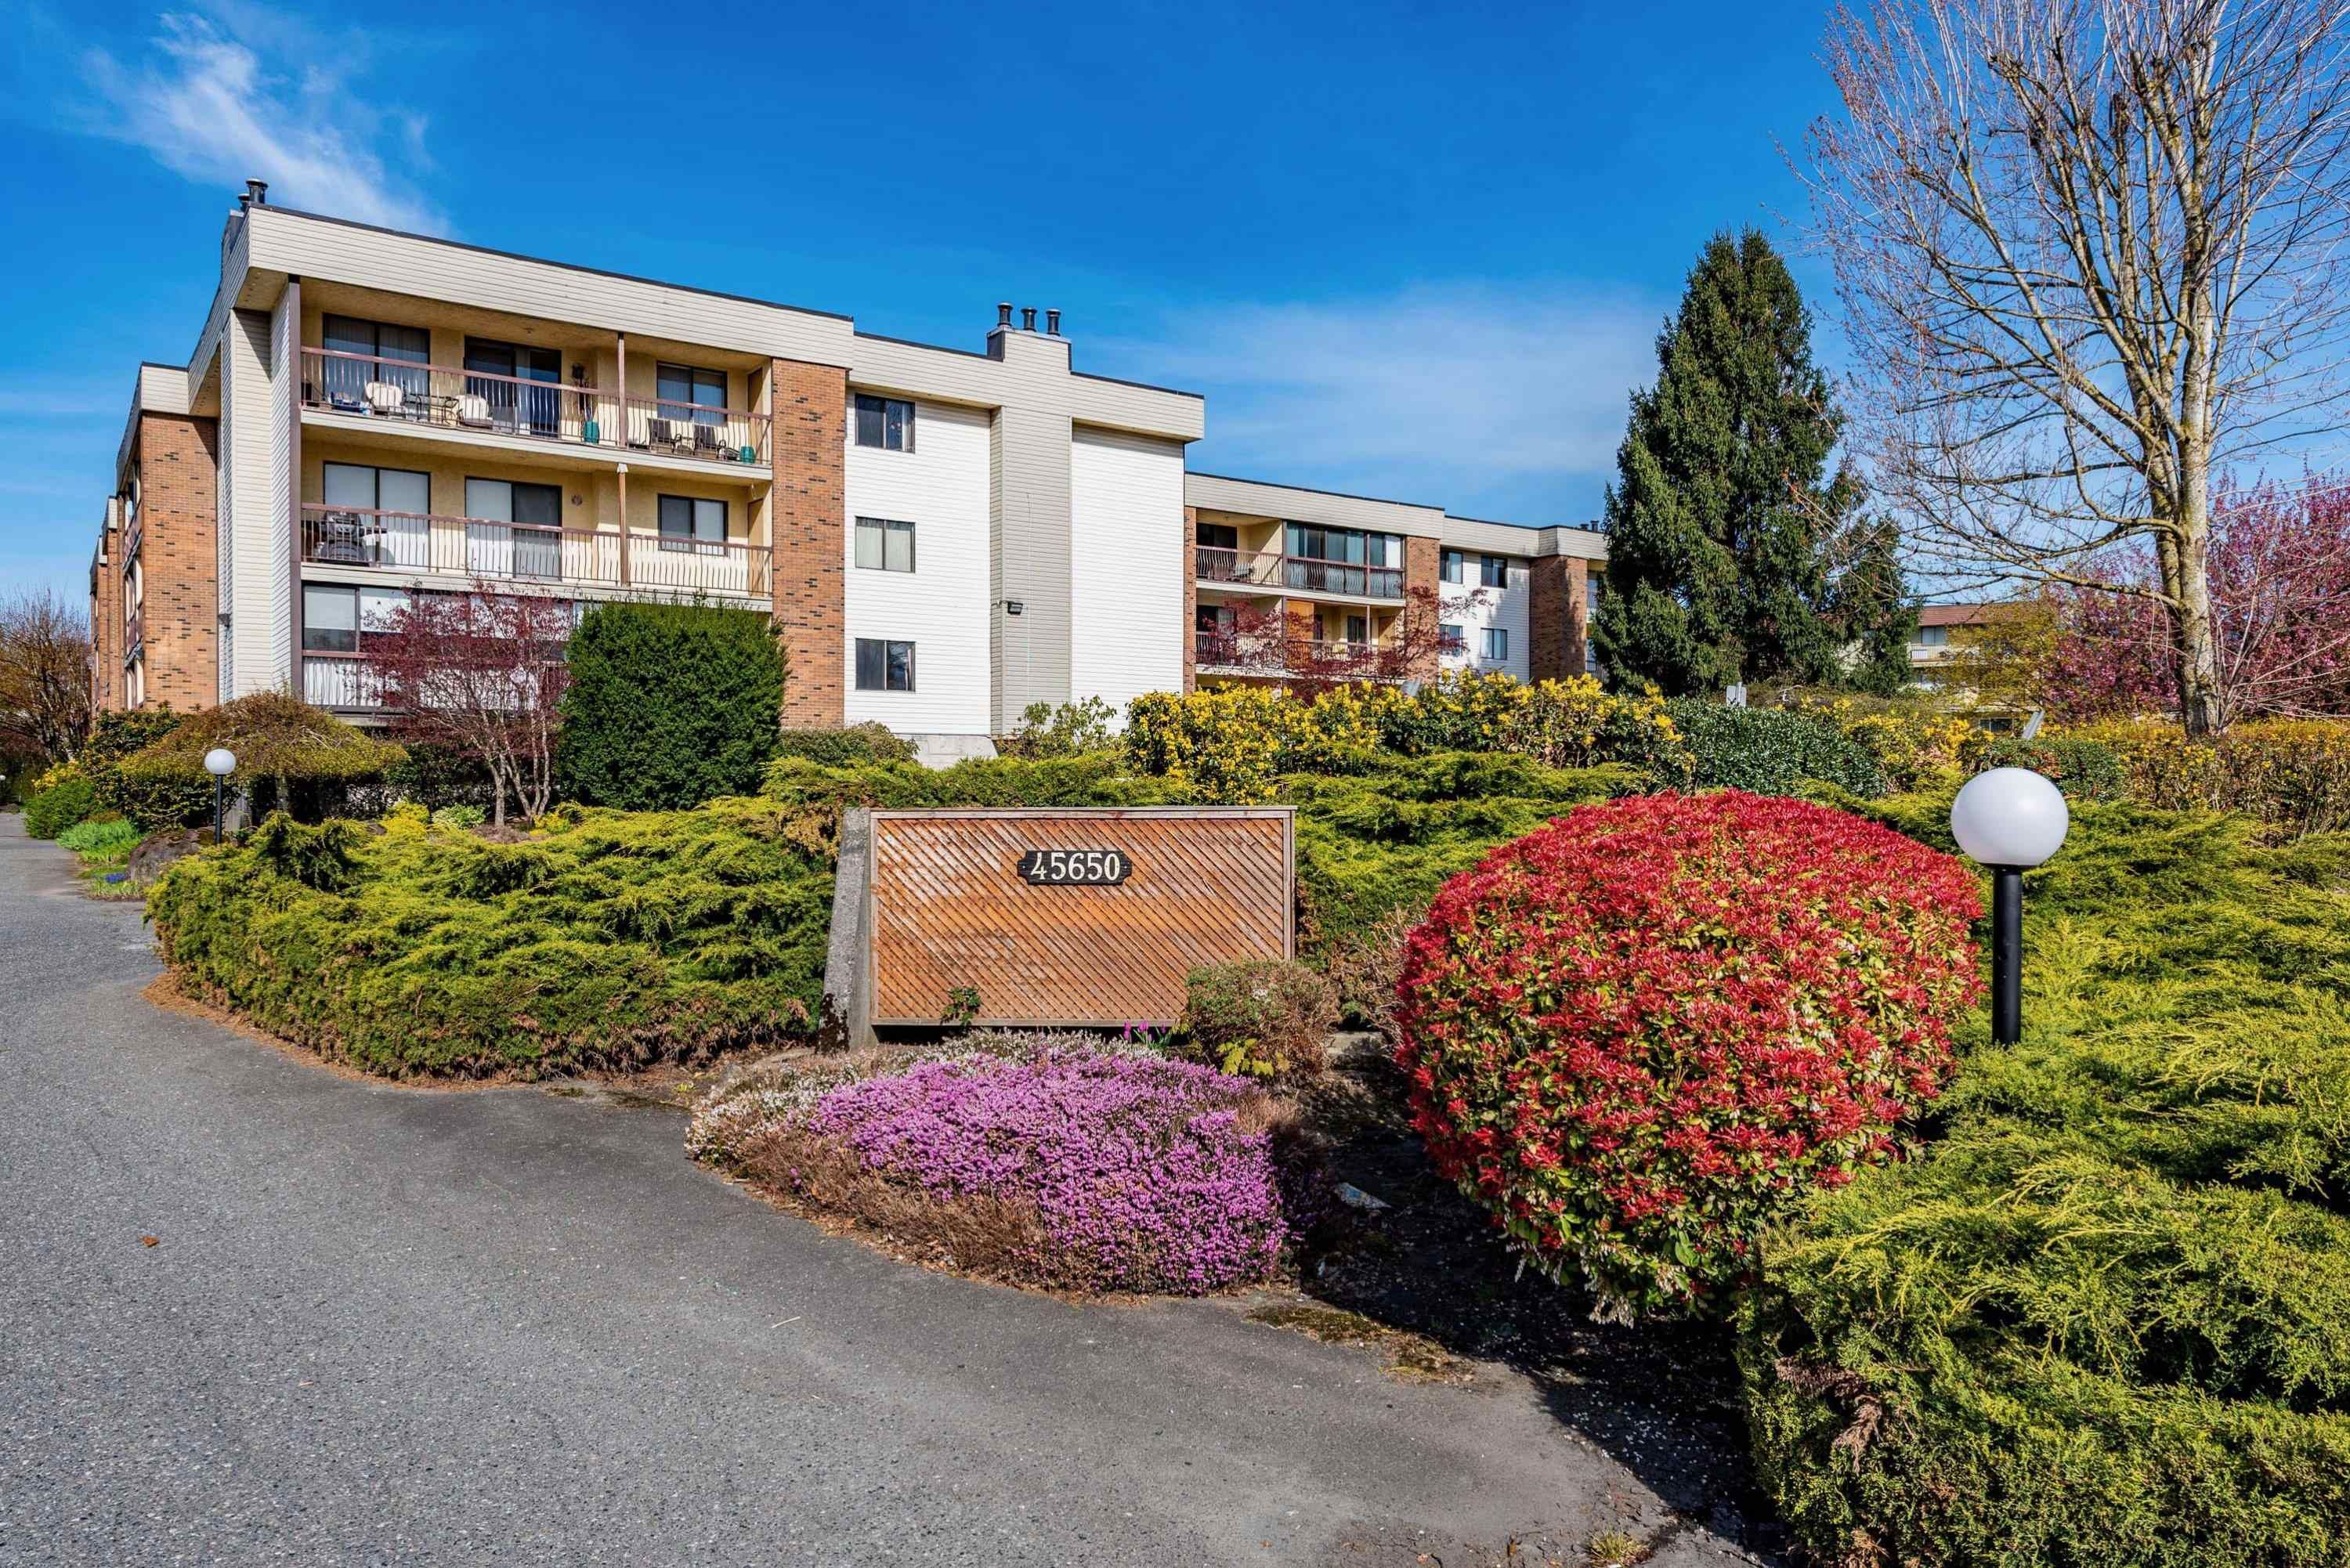 I have sold a property at 1202 45650 MCINTOSH DR in Chilliwack
